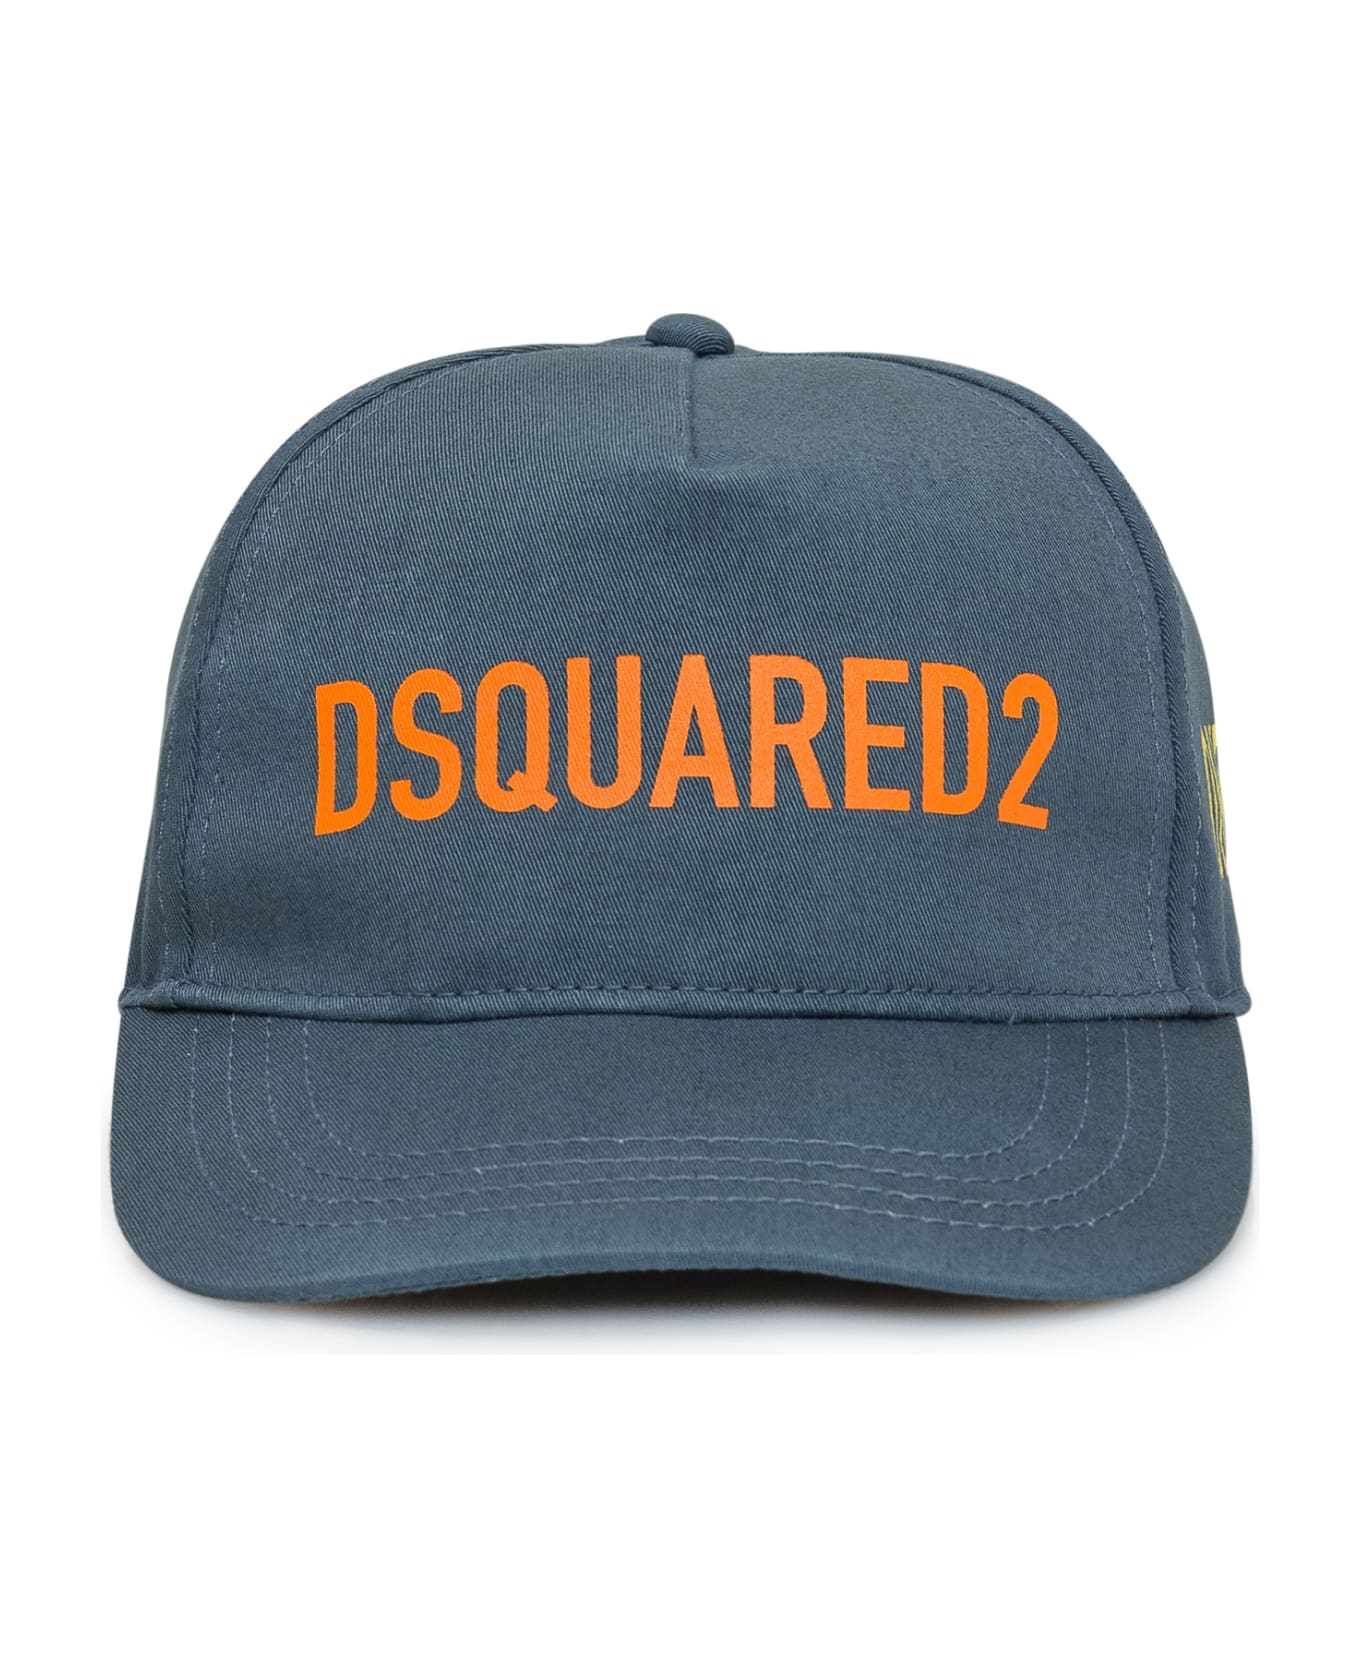 Dsquared2 One Life One Planet Baseball Hat - SEA PINE